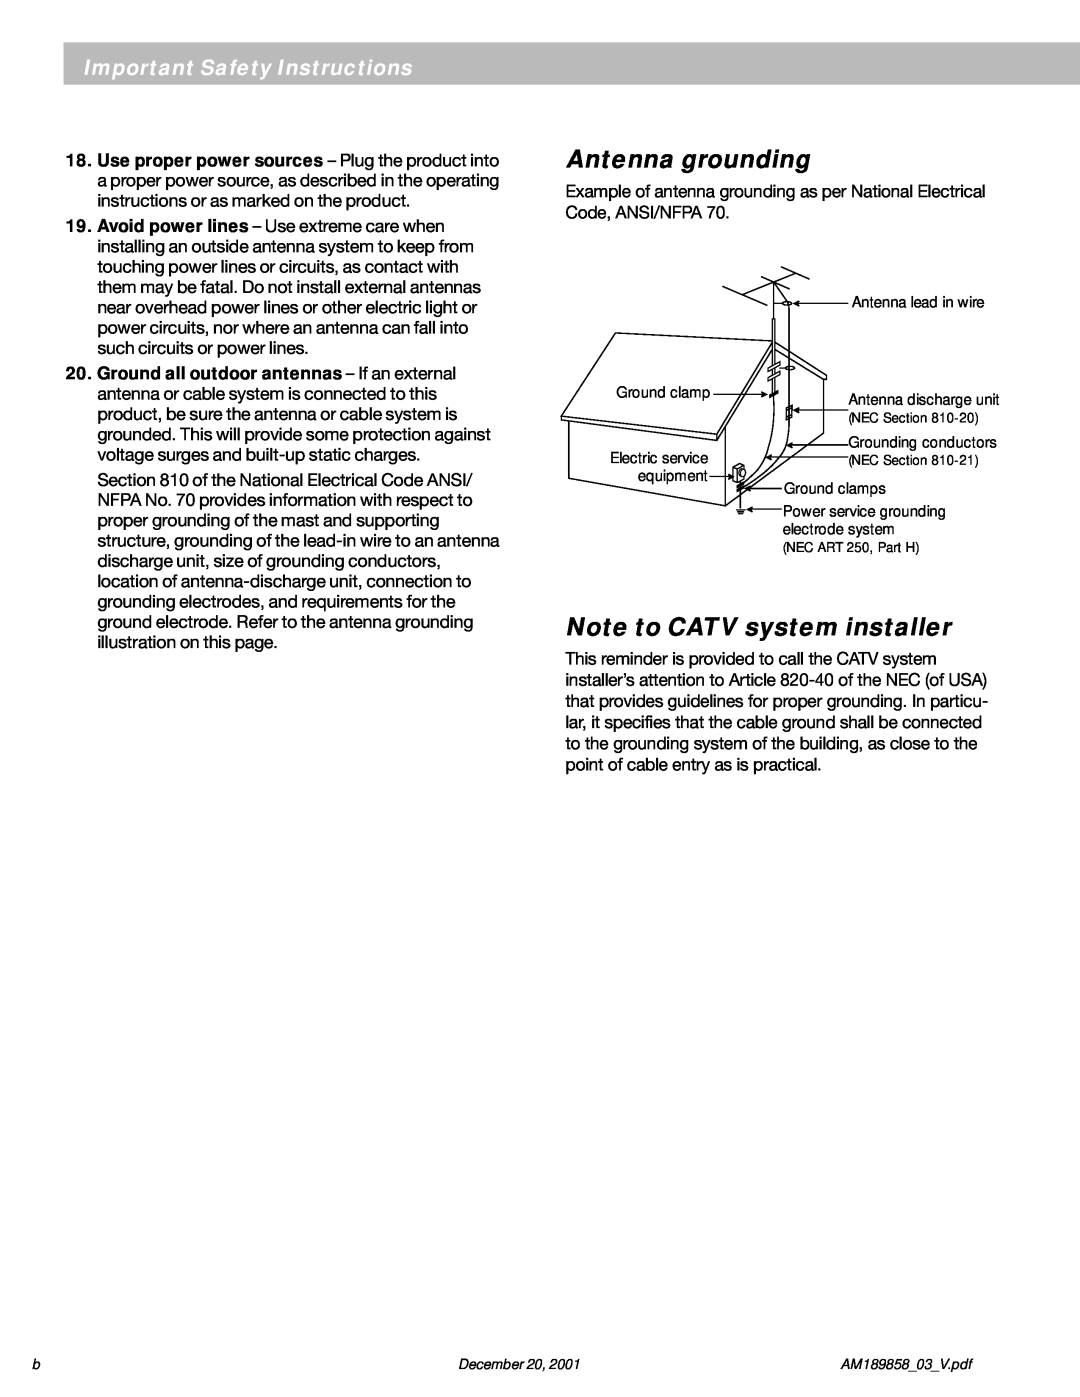 Bose 40 manual Antenna grounding, Note to CATV system installer, Important Safety Instructions, Antenna lead in wire 